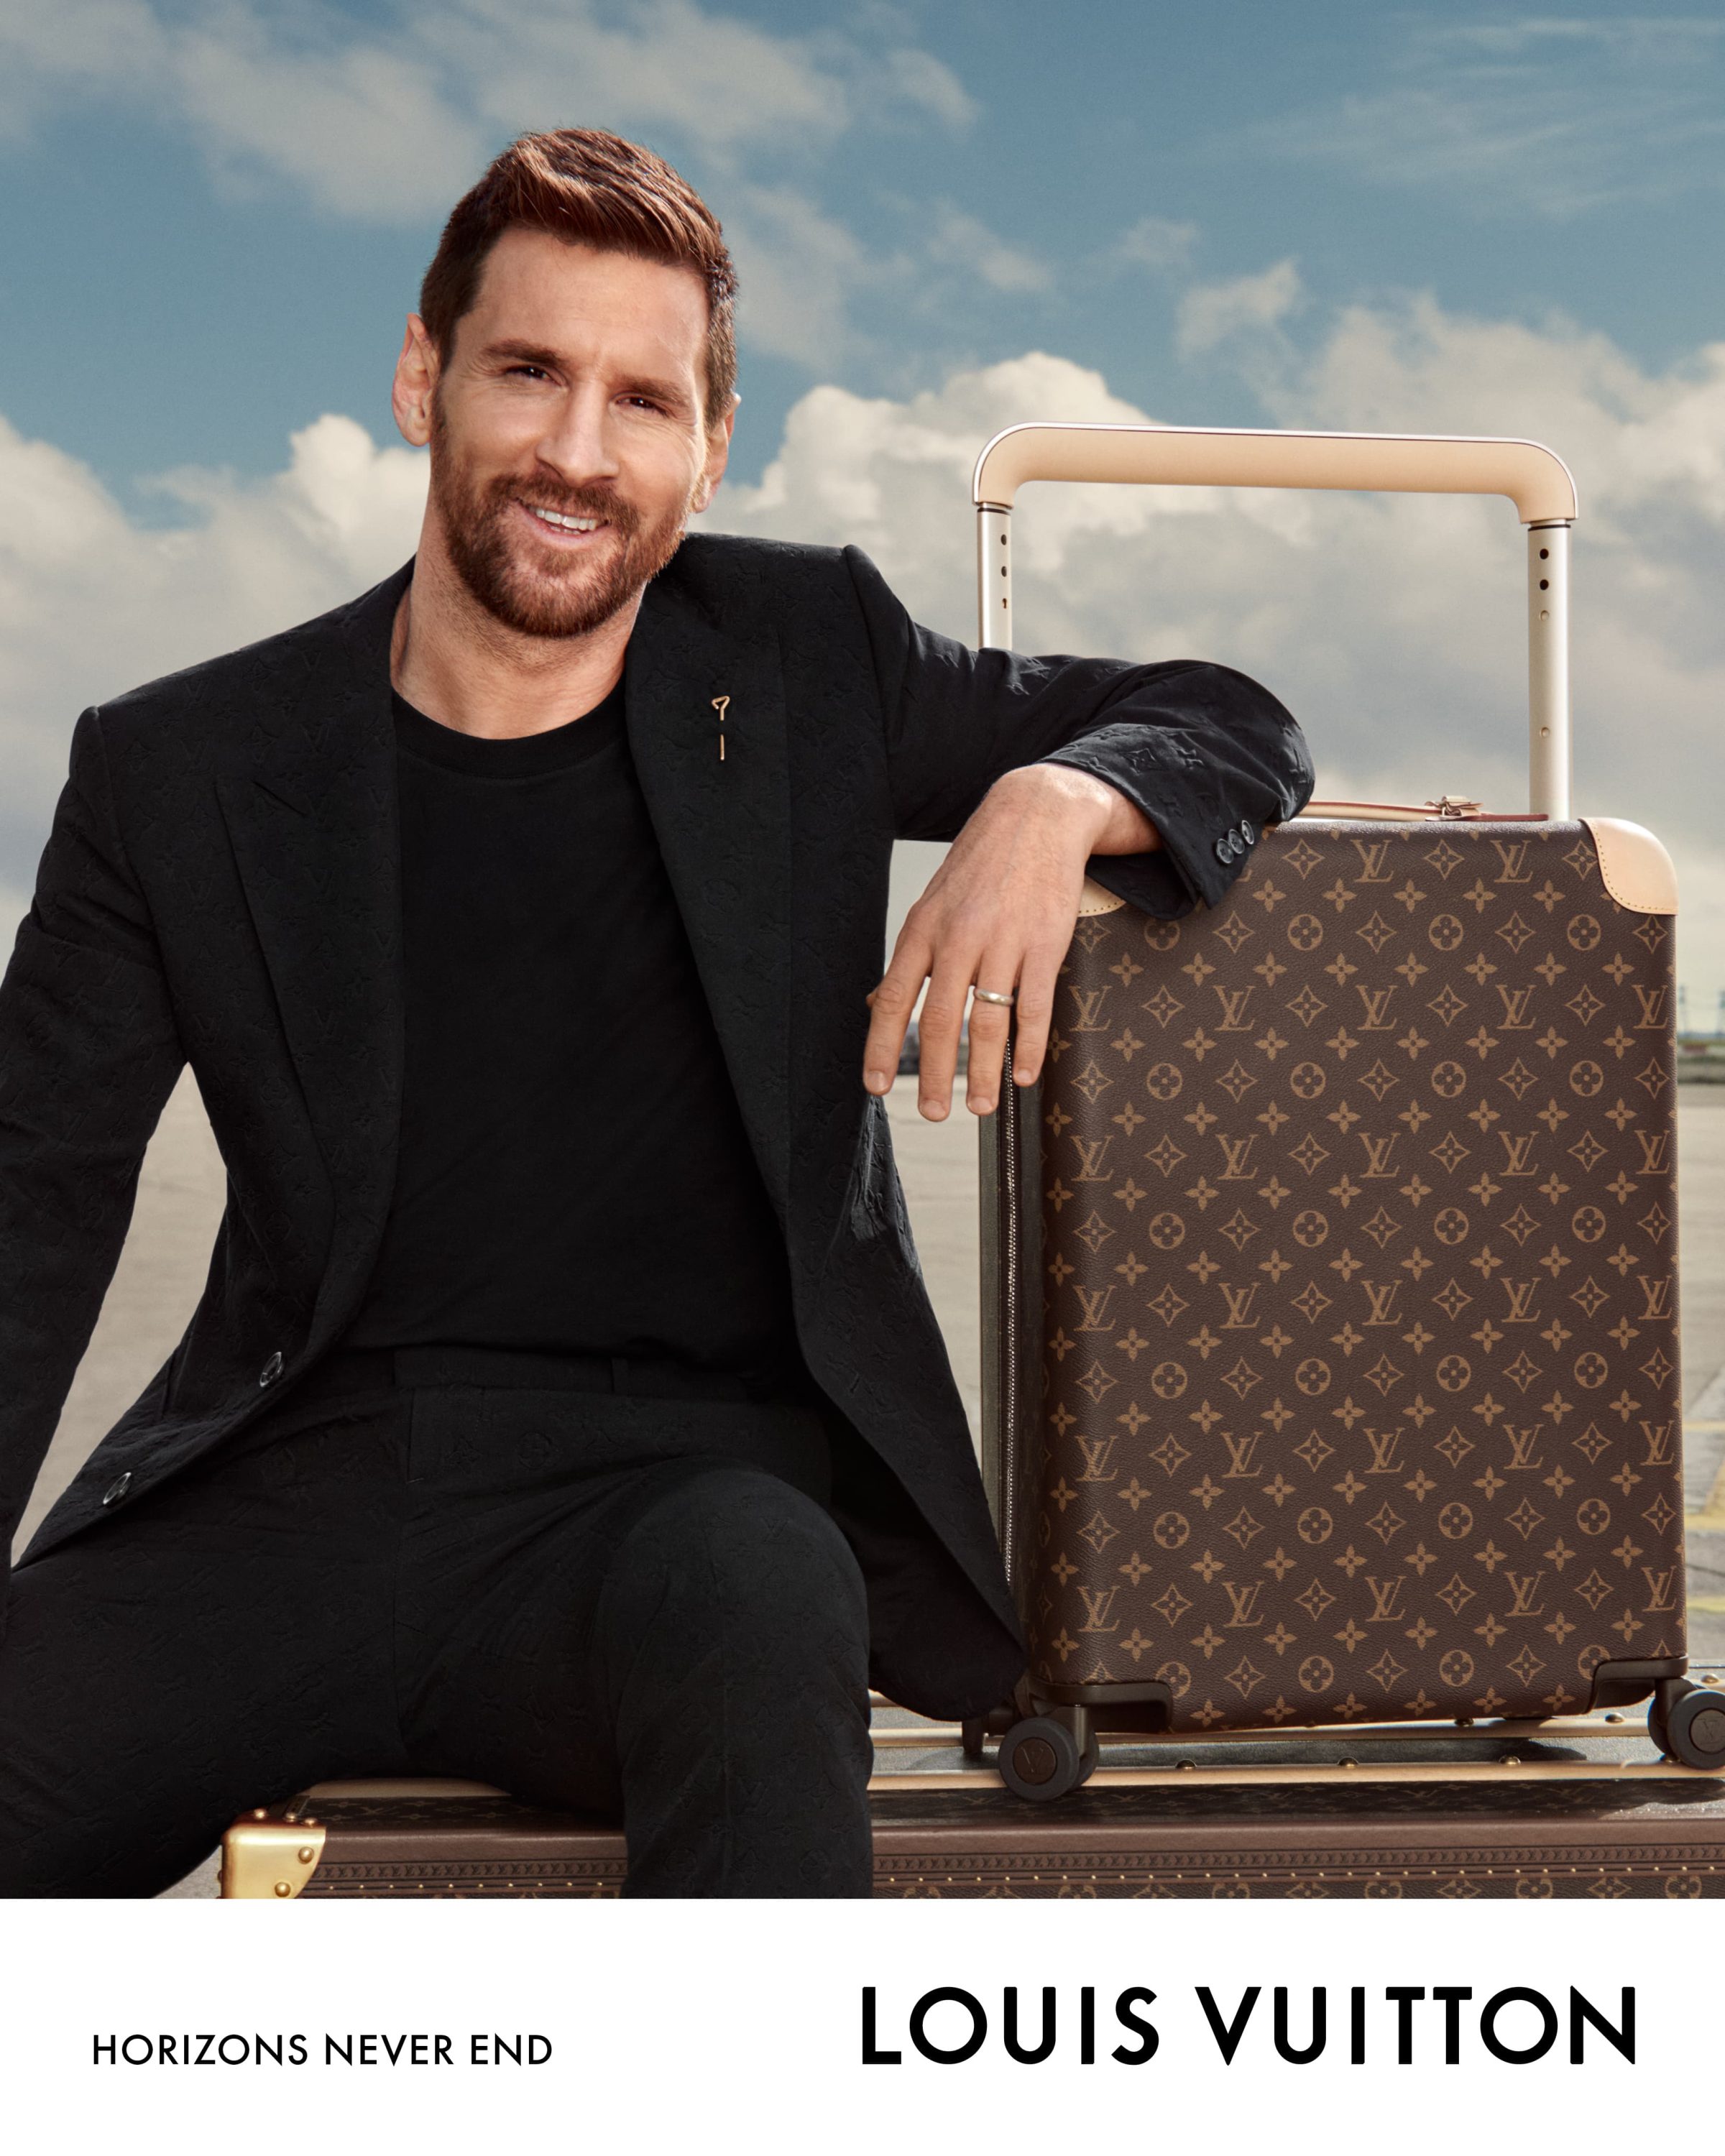 Lionel Messi Stars in Louis Vuitton 'Horizons Never End Travel' | The ...